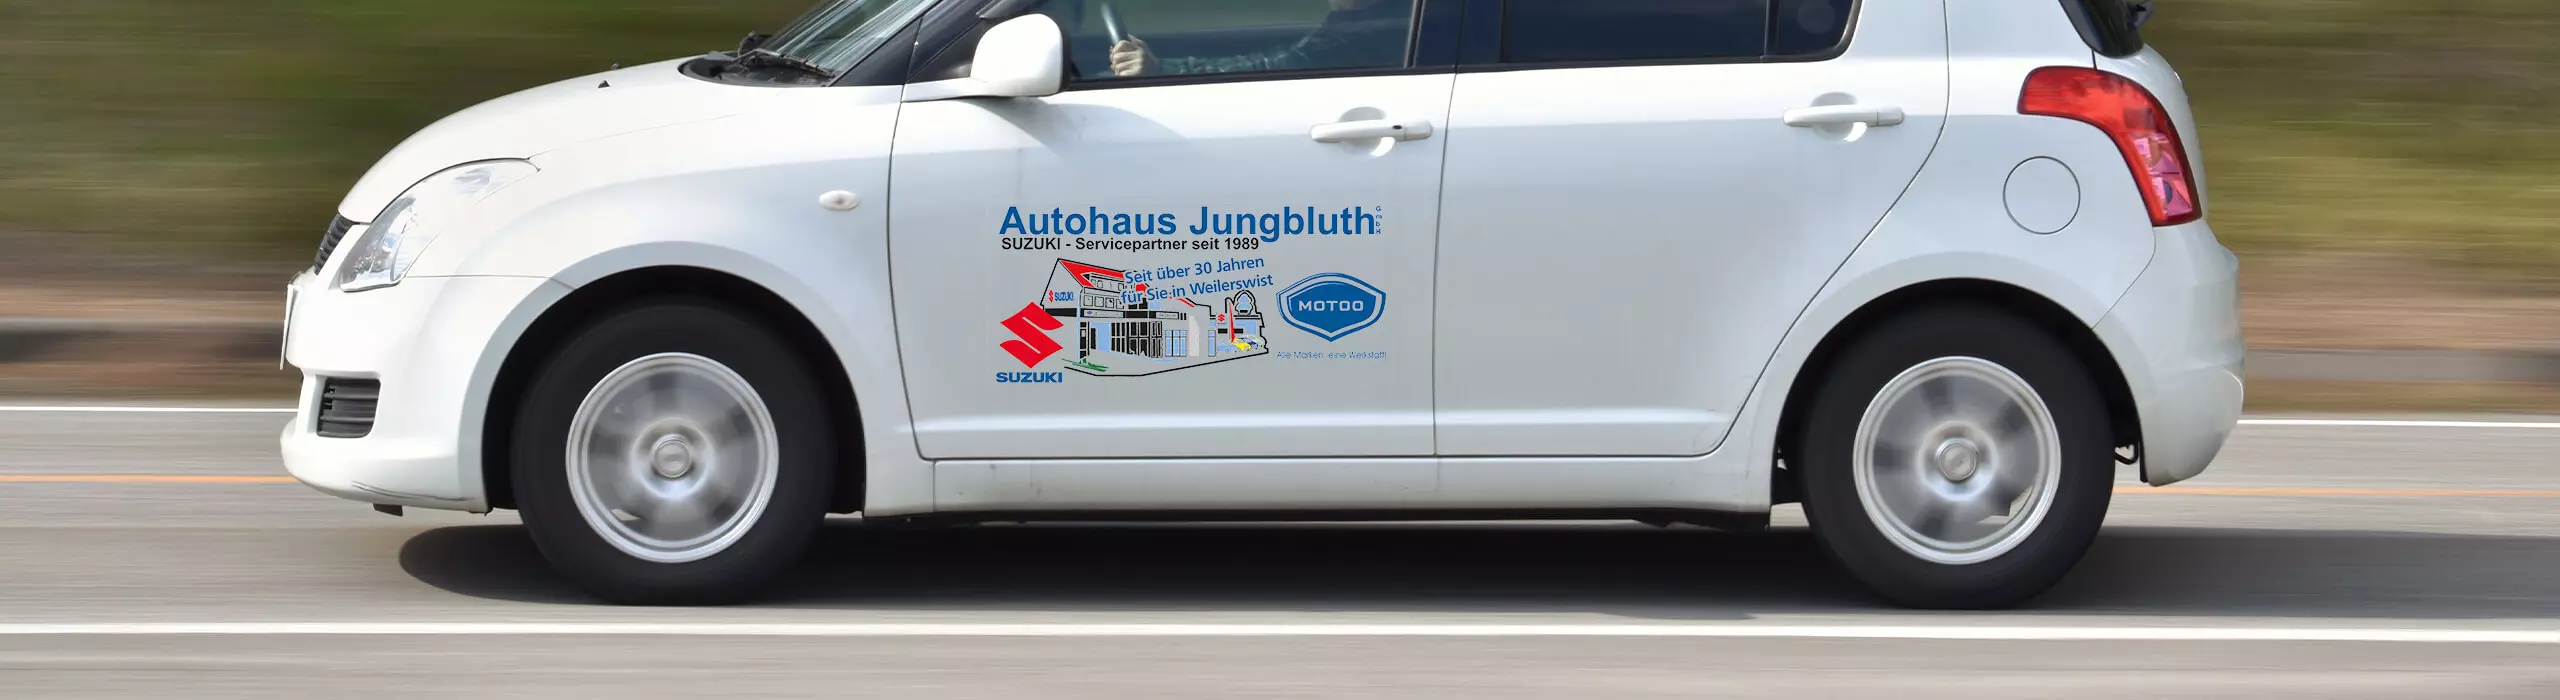  Autohaus Jungbluth GmbH 